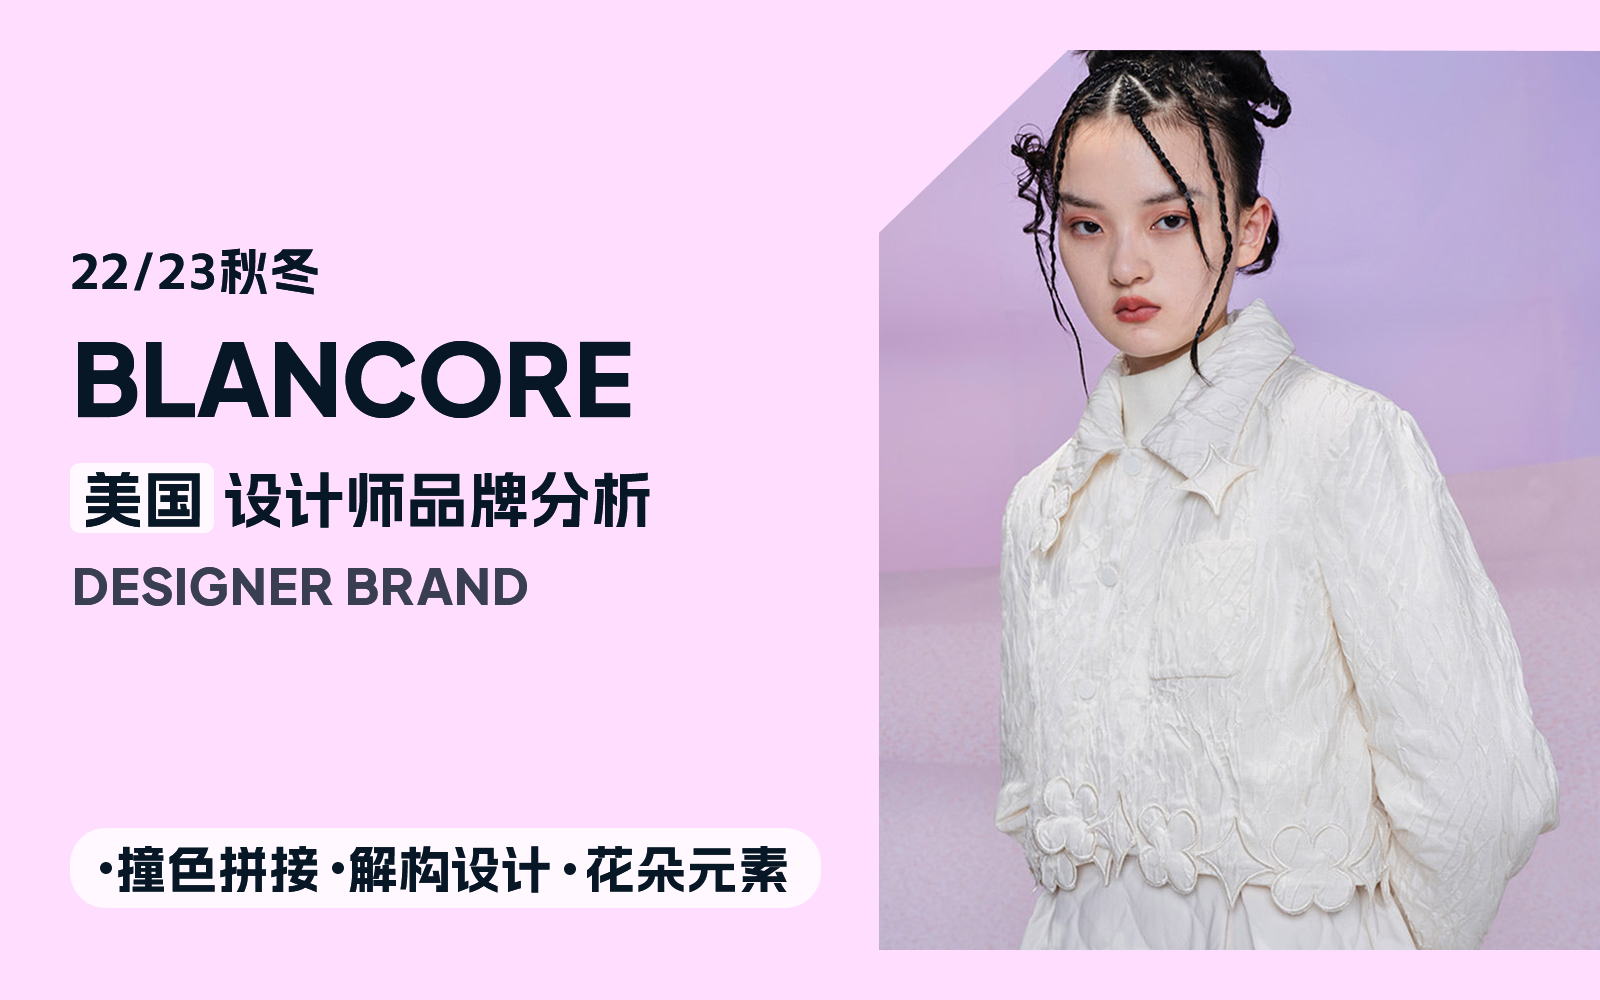 Sweet & Cool Lady -- The Analysis of Blancore The Womenswear Designer Brand